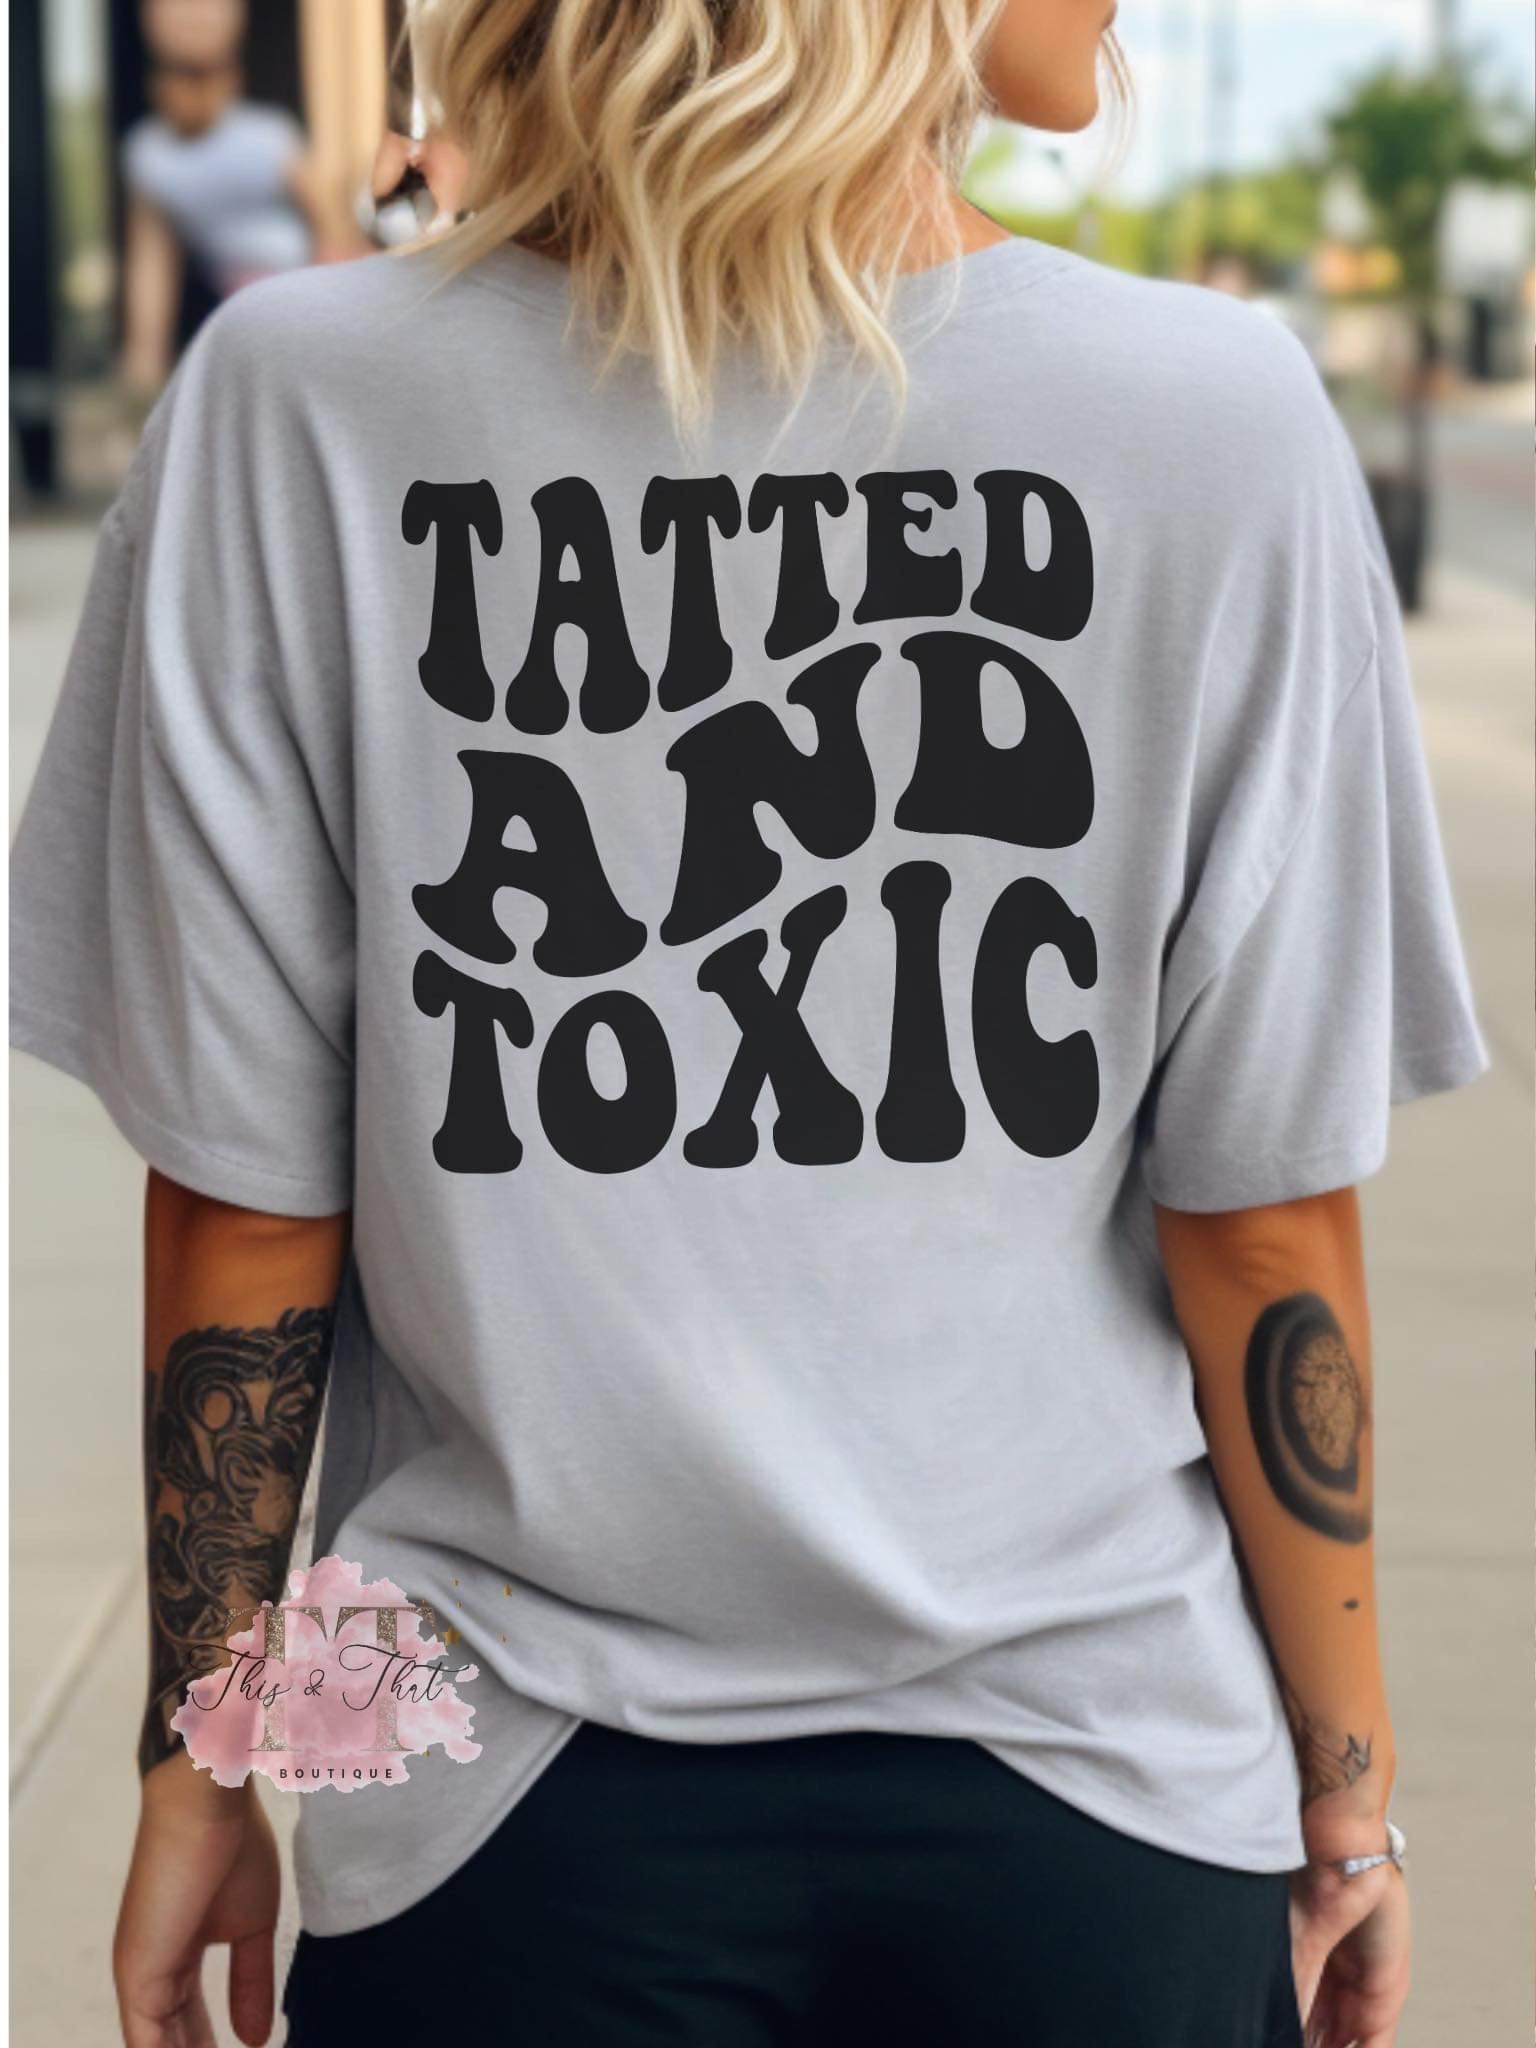 Tatted and Toxic